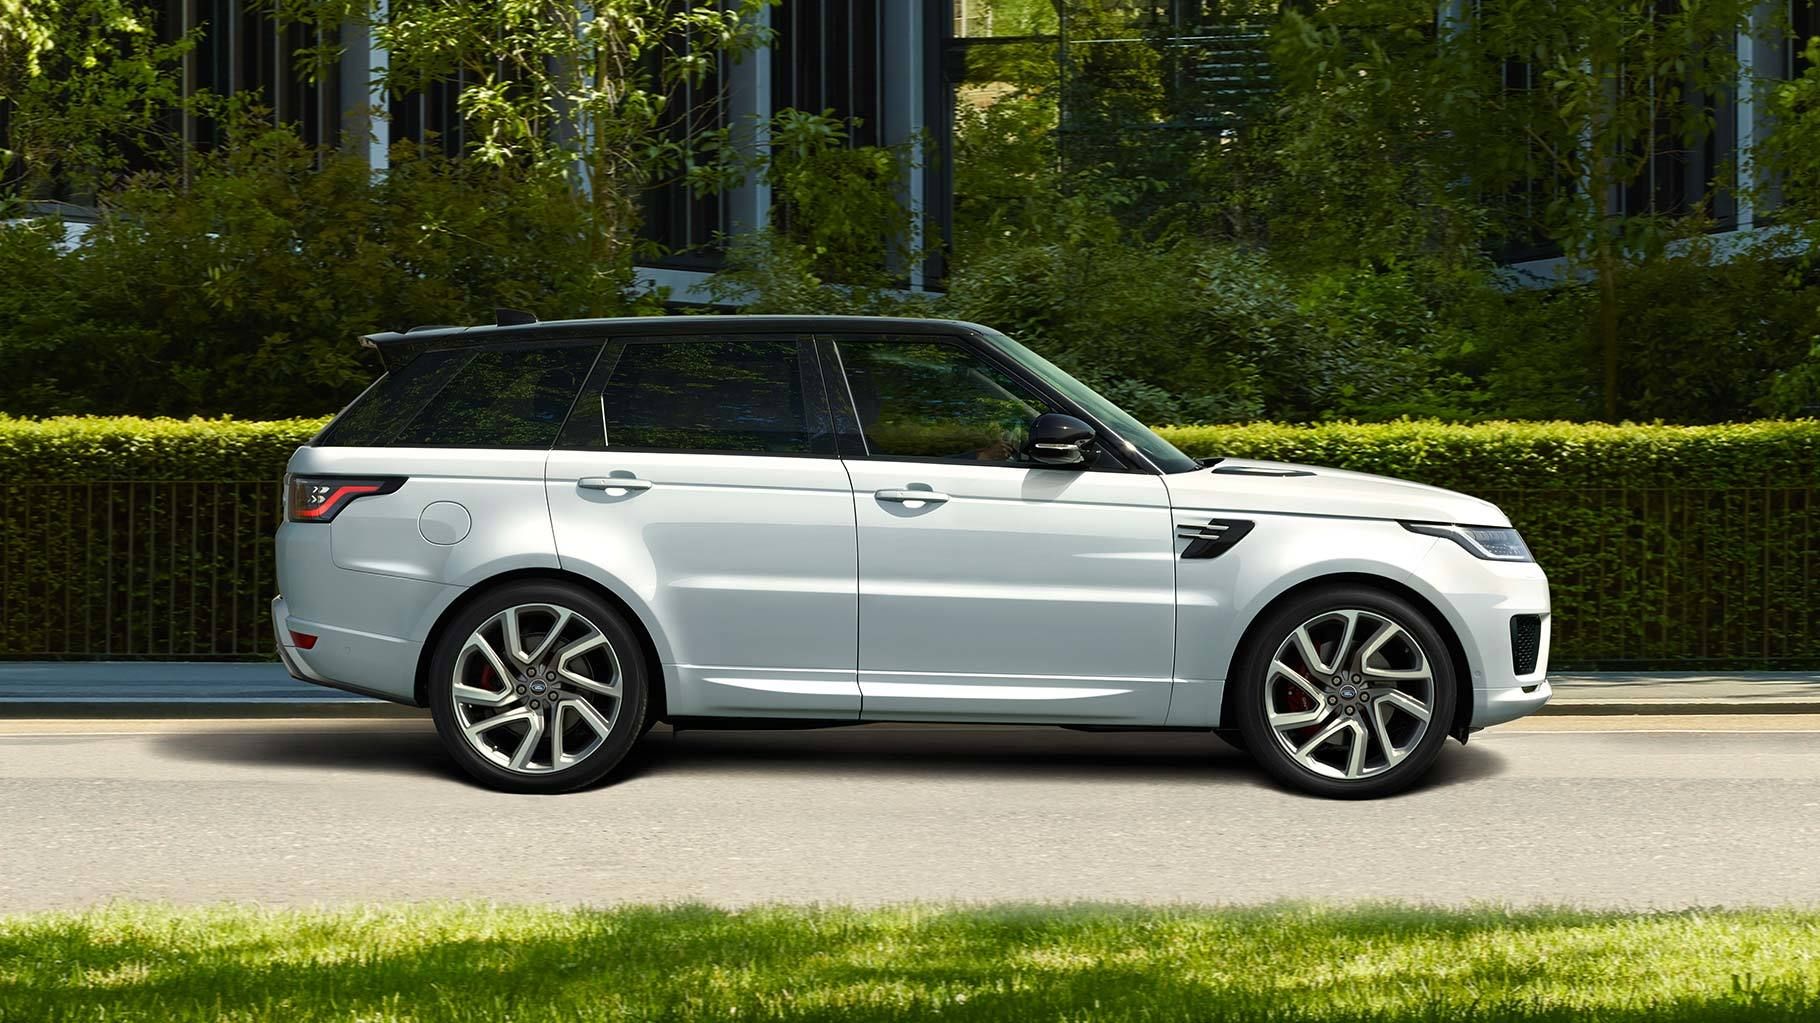 The 2022 Range Rover Sport Autobiography With Dynamic Pack.